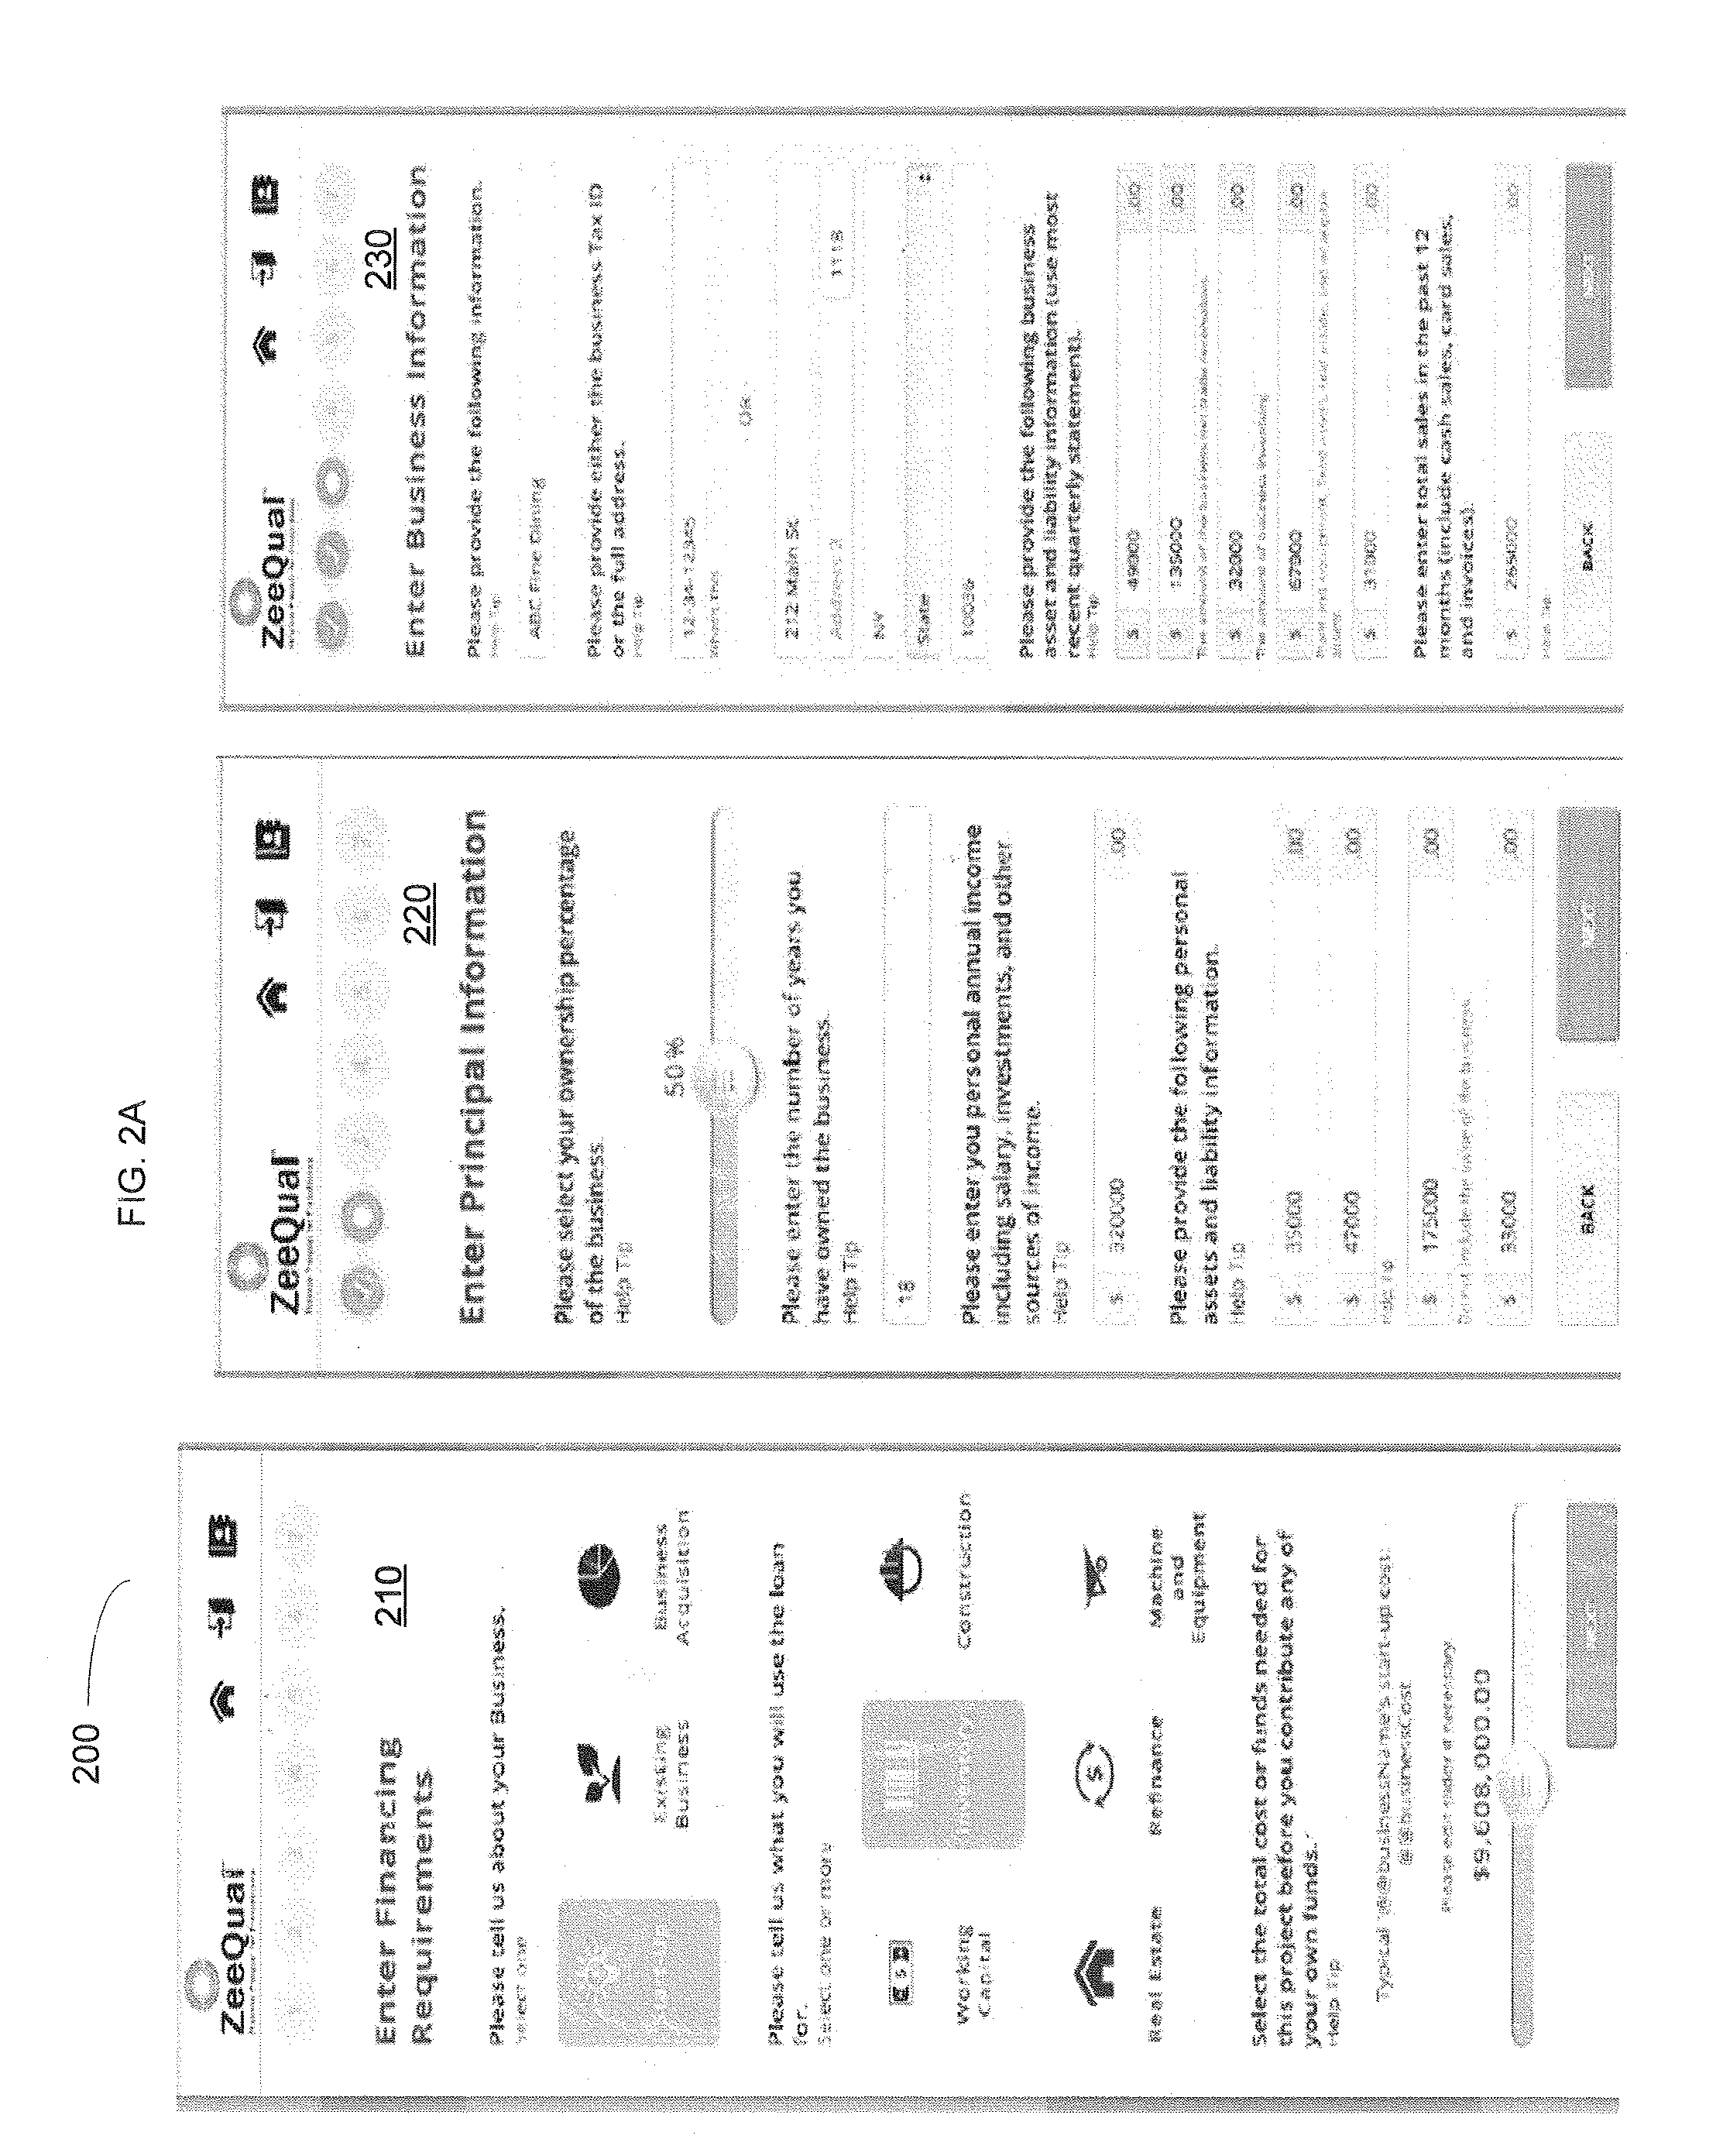 System and method for gathering and presenting credit information and loan information for individuals and small businesses